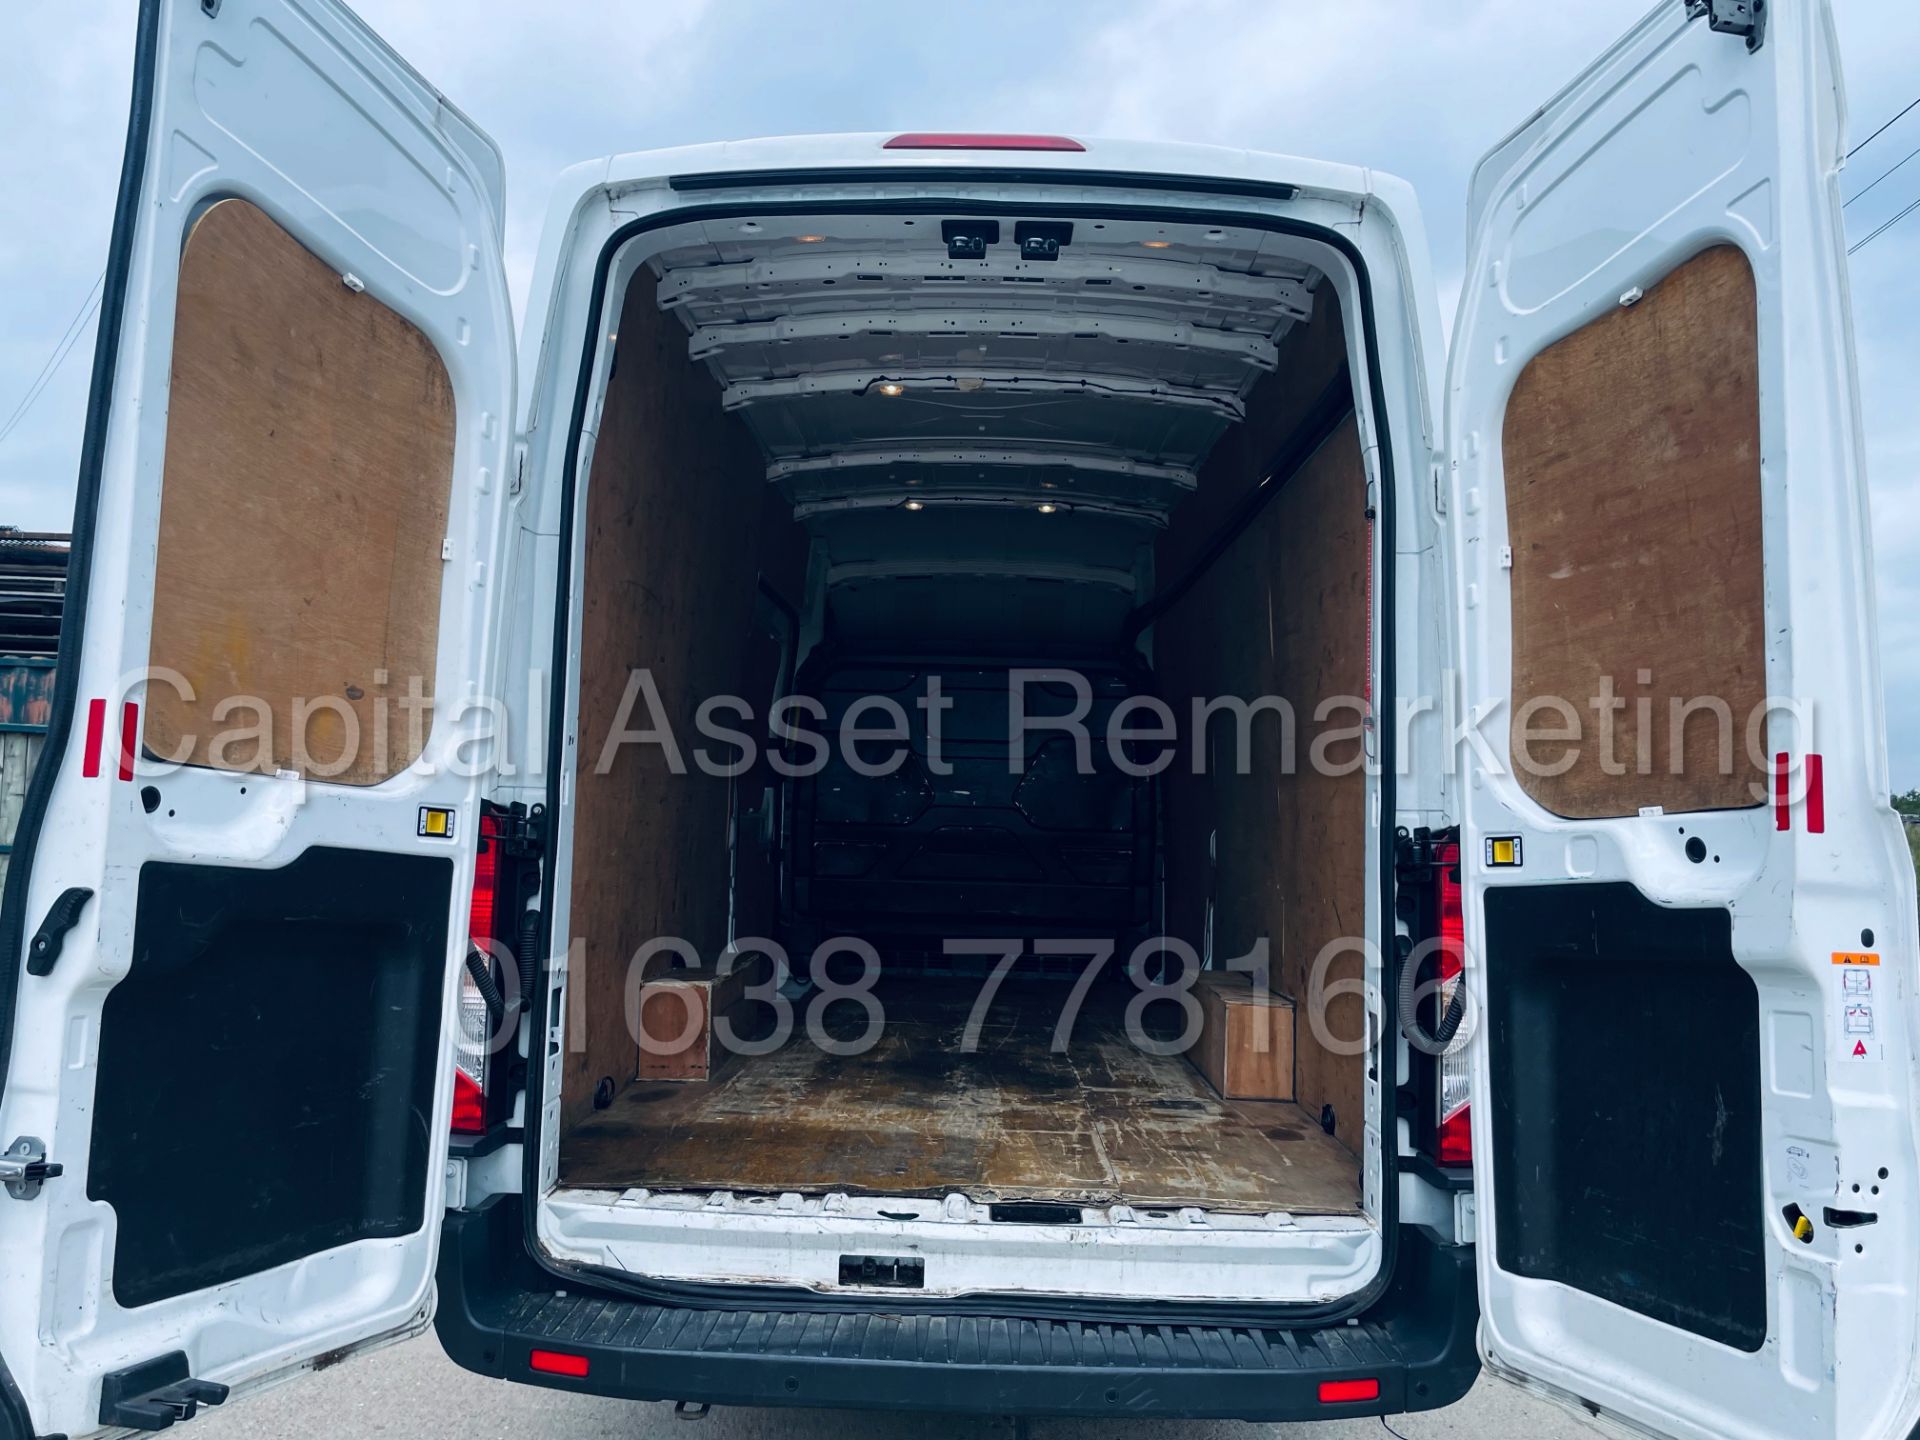 FORD TRANSIT 130 T350 *L4 - XLWB HI-ROOF* (2019 - EURO 6) '2.0 TDCI - 6 SPEED' (1 OWNER) *AIR CON* - Image 24 of 42